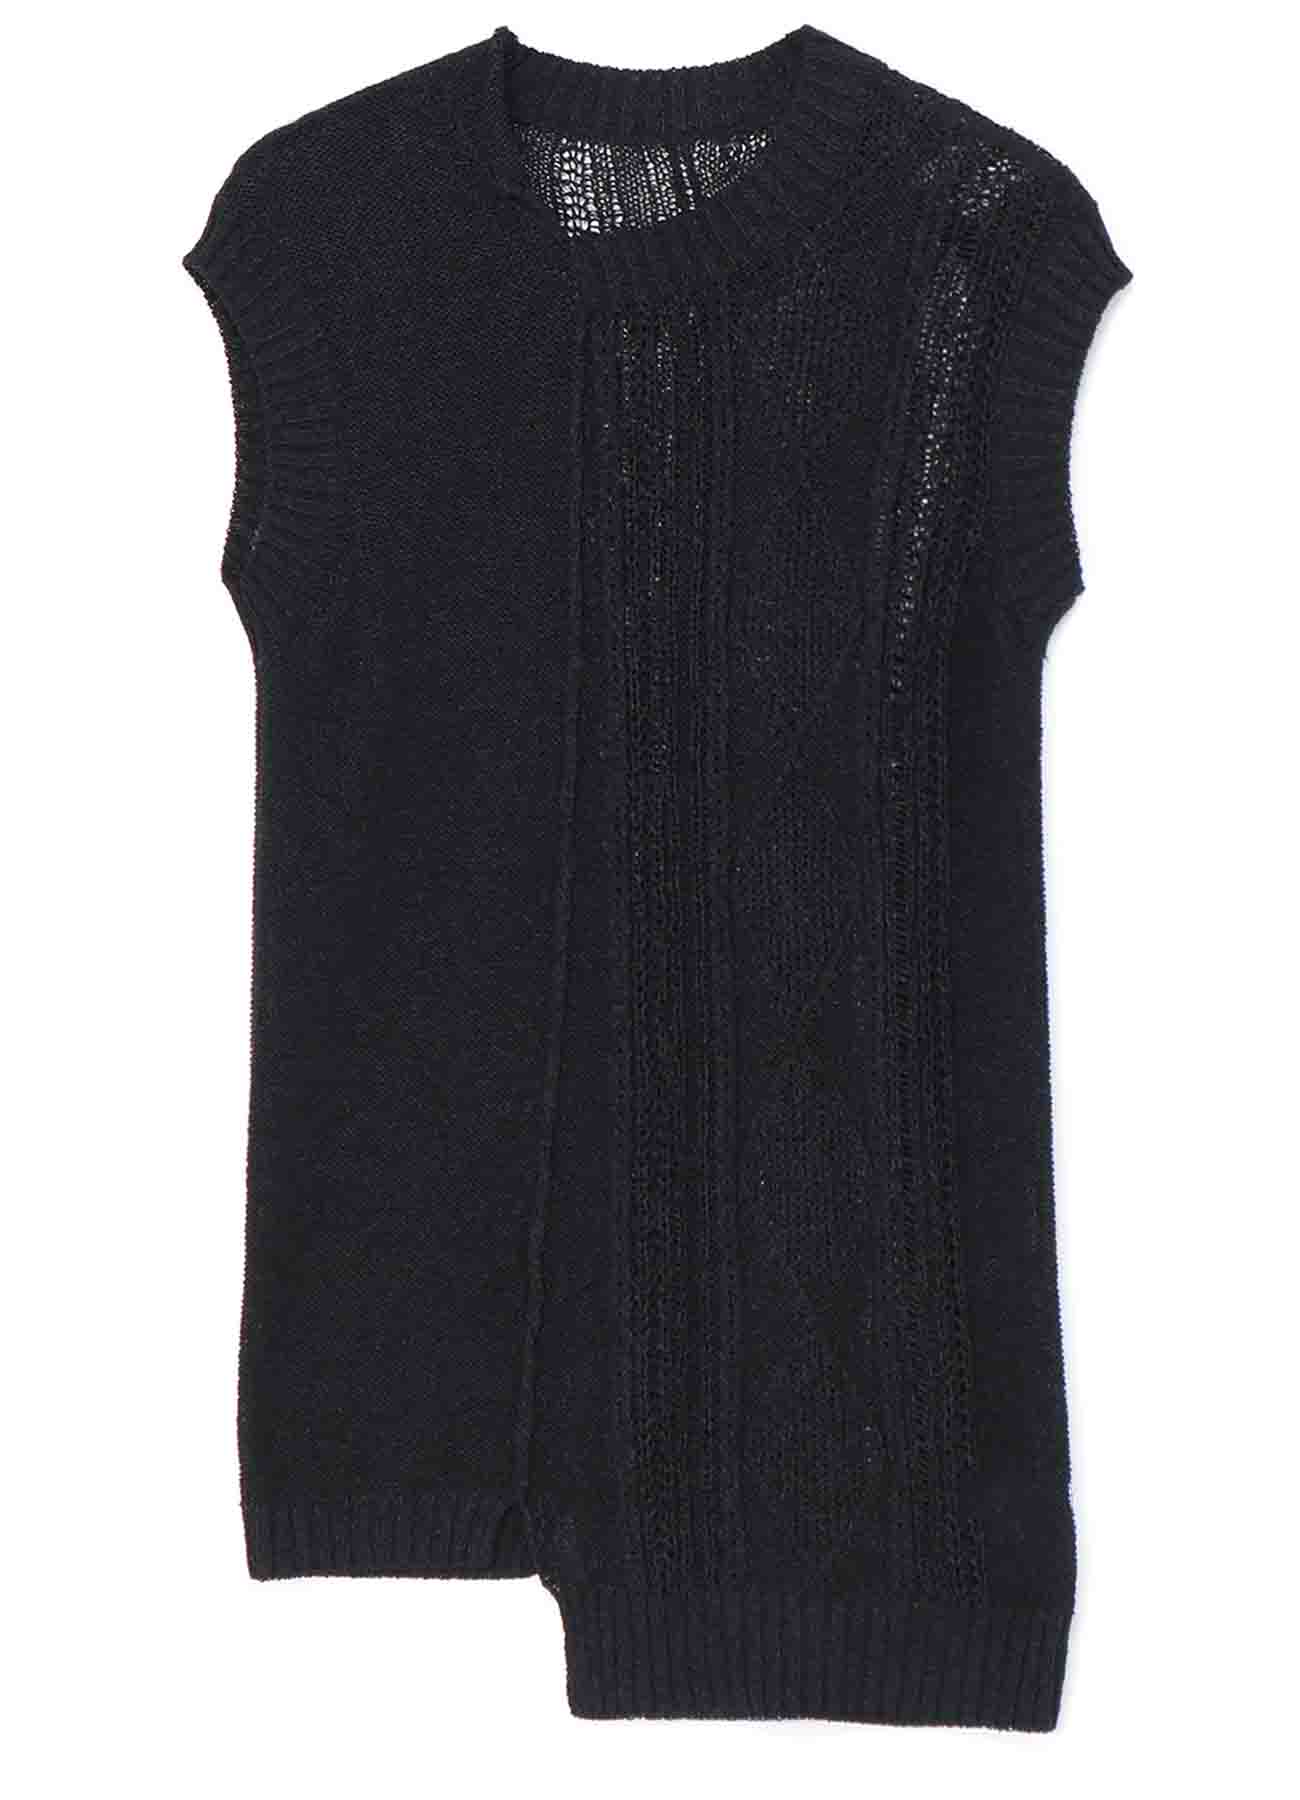 PLAIN STITCH BACK SIDE x CABLE SLEEVELESS PULLOVER